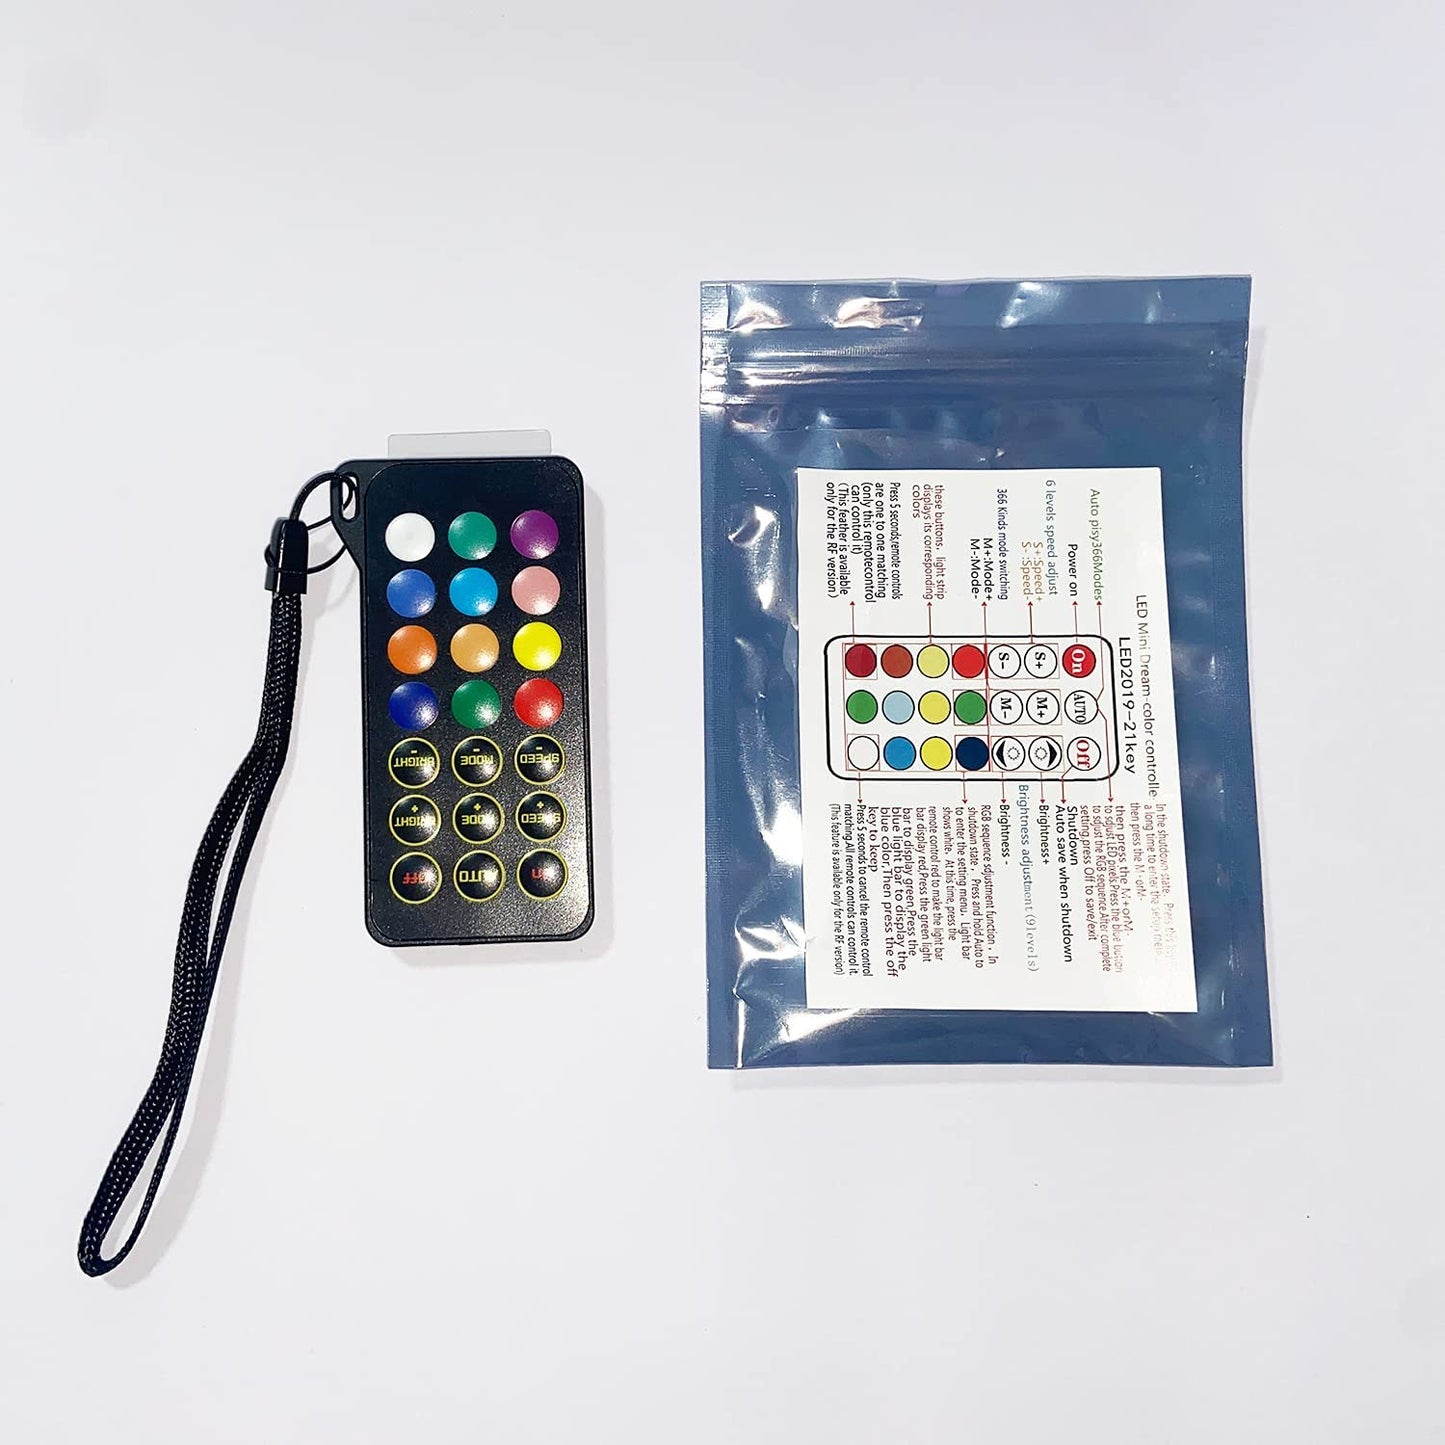 Replacement Remote for Led Whip Light